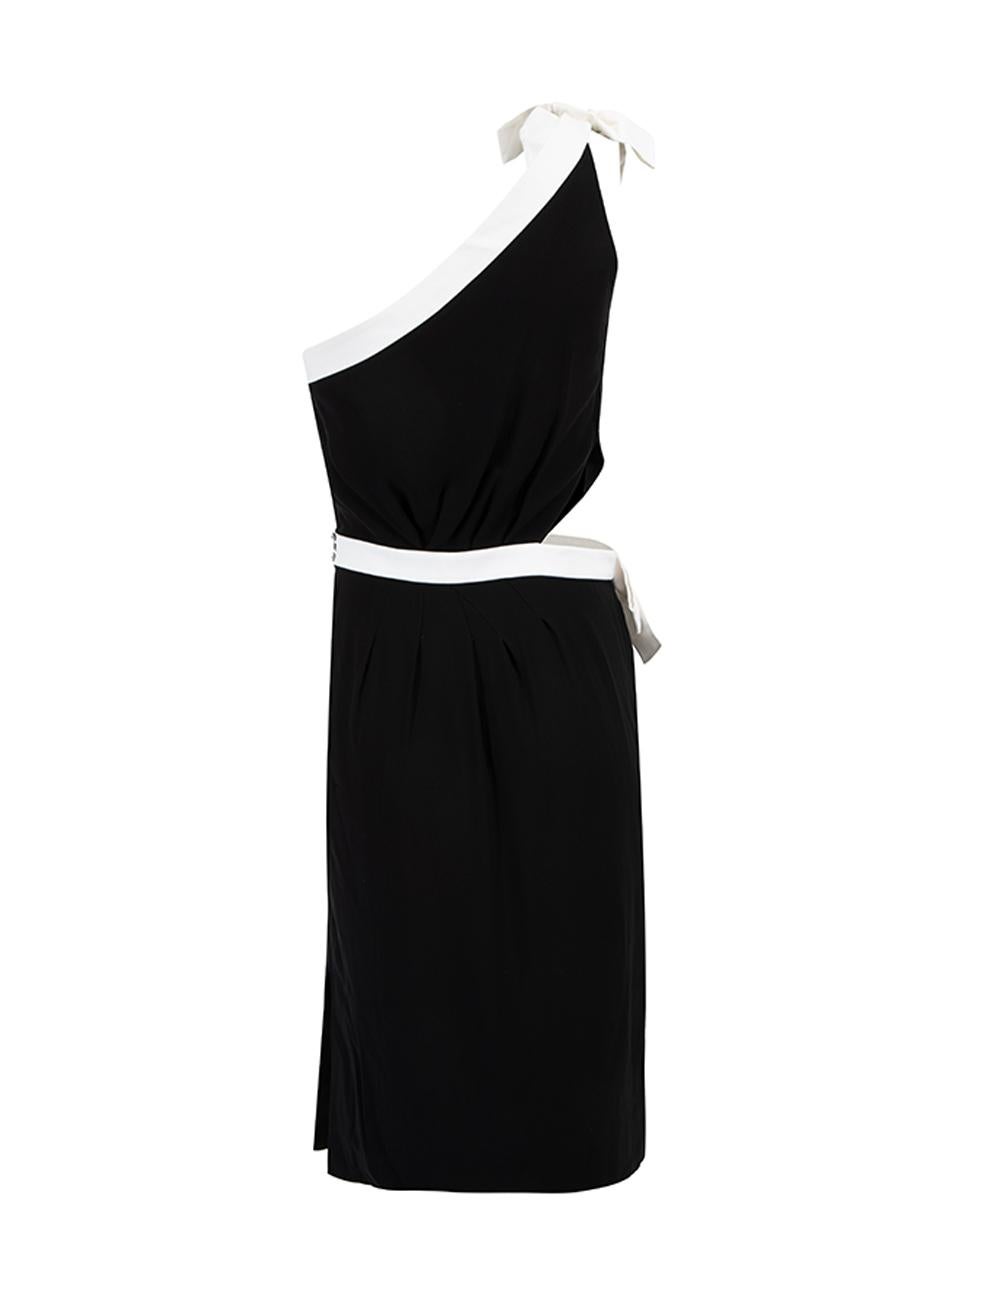 Azzaro Black and White Cutout One Shoulder Mini Dress Size M In Excellent Condition For Sale In London, GB